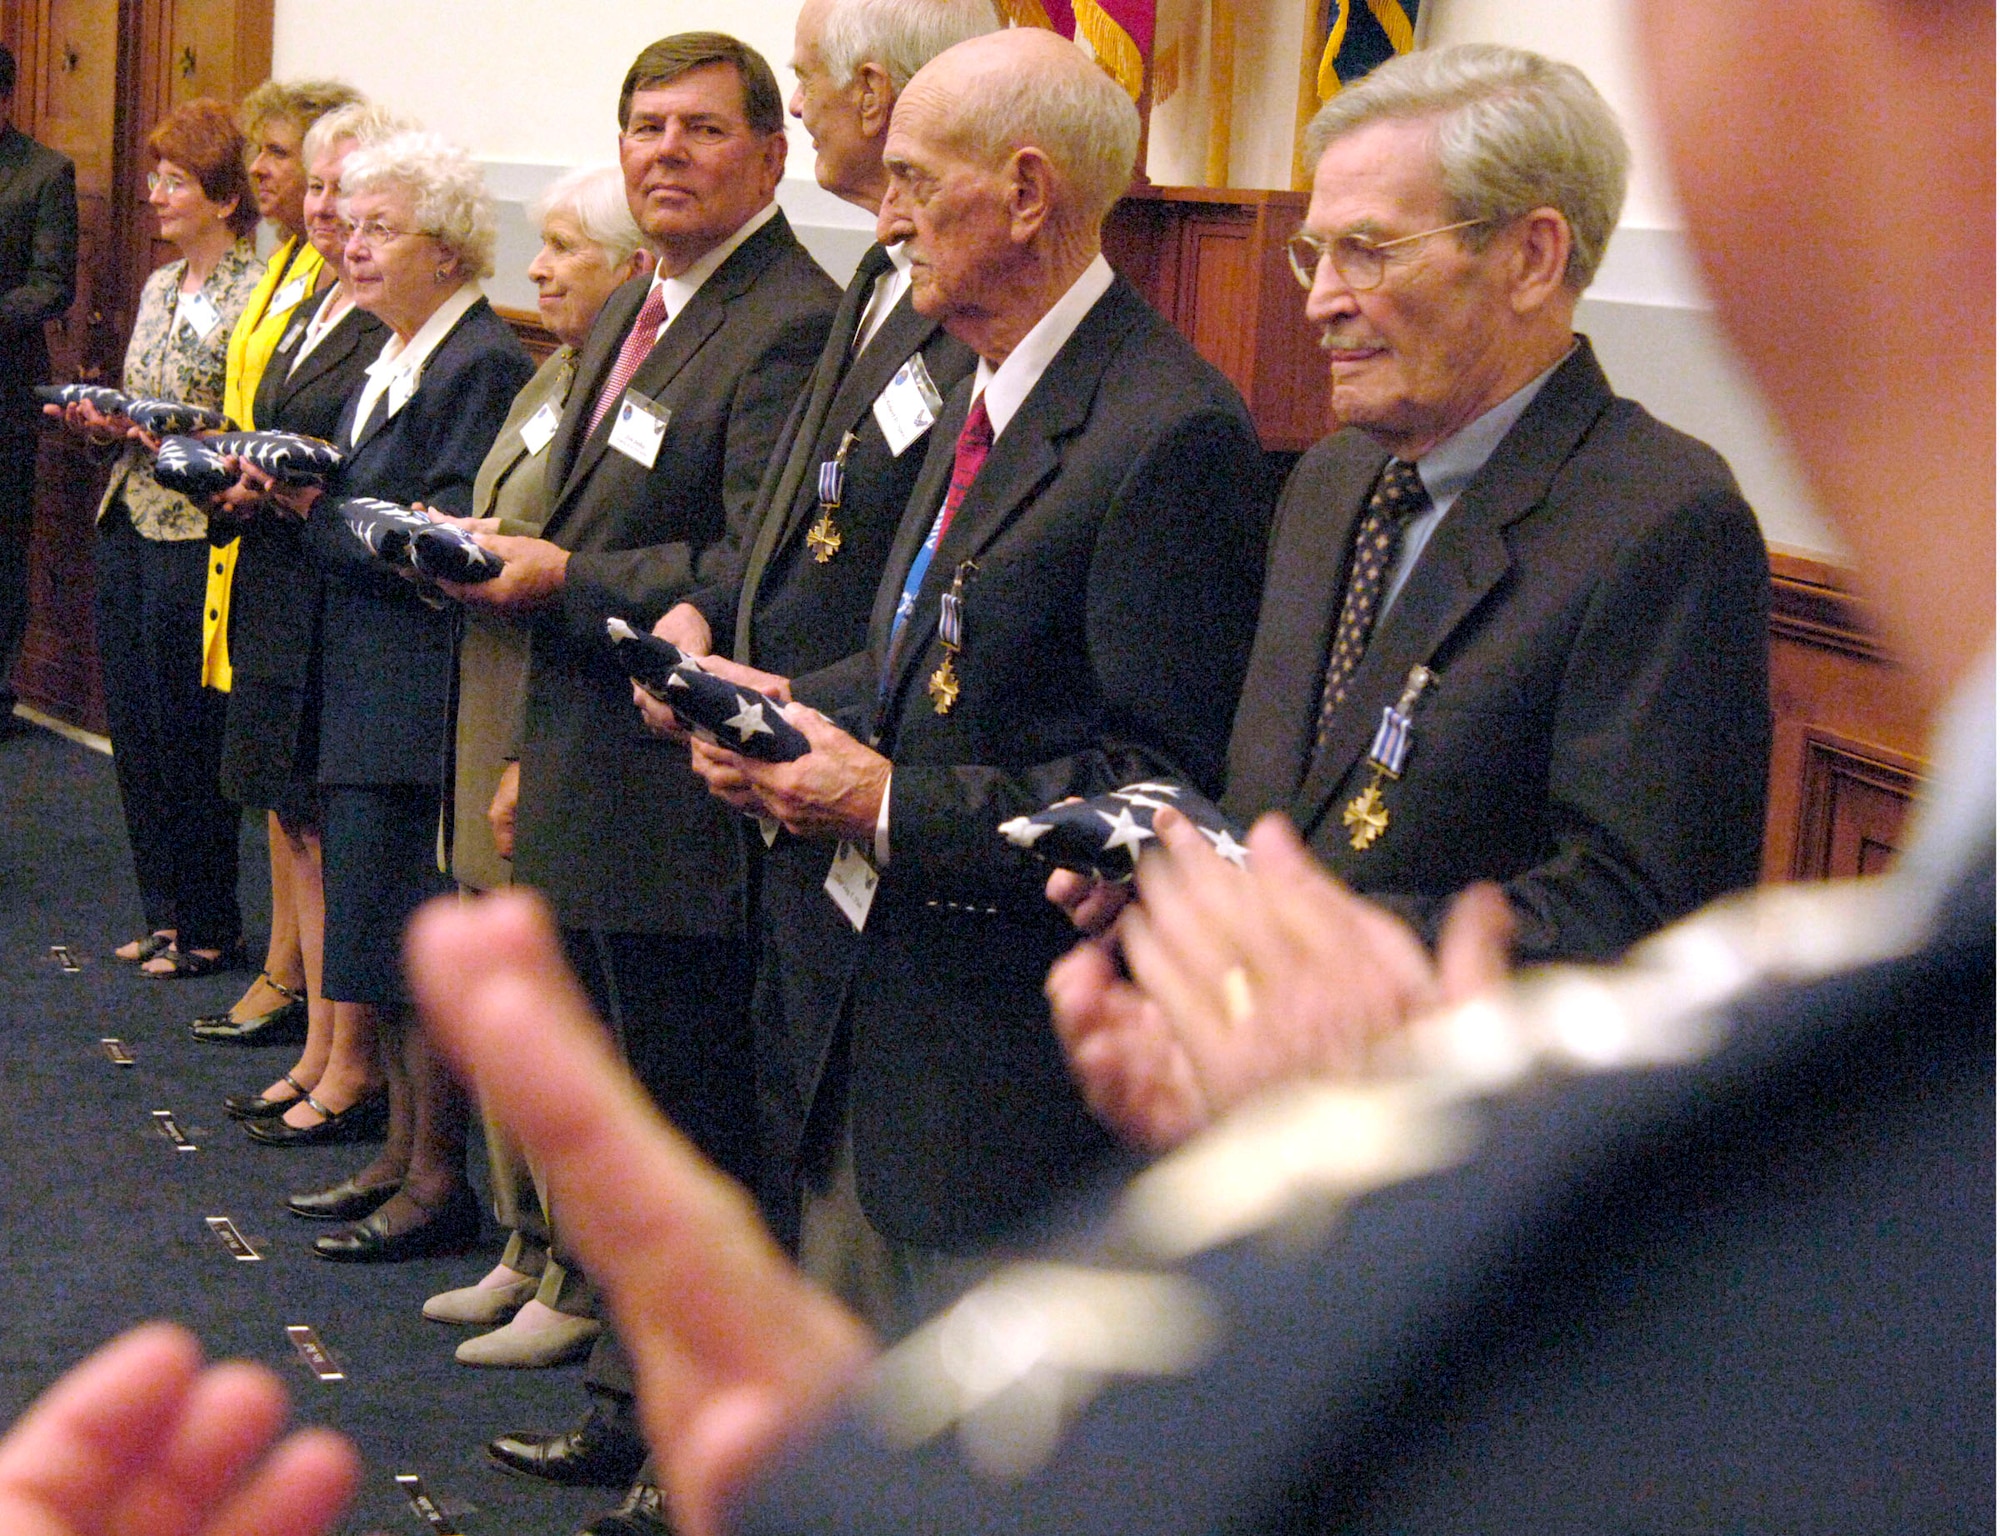 World War II's "Flak Man" B-24 Liberator crewmembers were honored with the Distinguished Flying Cross during a ceremony April 24 in Washington, D.C. From right are crew members 1st Lt. Edward L. "Mac" McNally, Tech. Sgt. Jay T. Fish, Staff Sgt. Robert D. Speed and families of deceased members. (U.S. Air Force photo/Tech. Sgt. Cohen A. Young) 